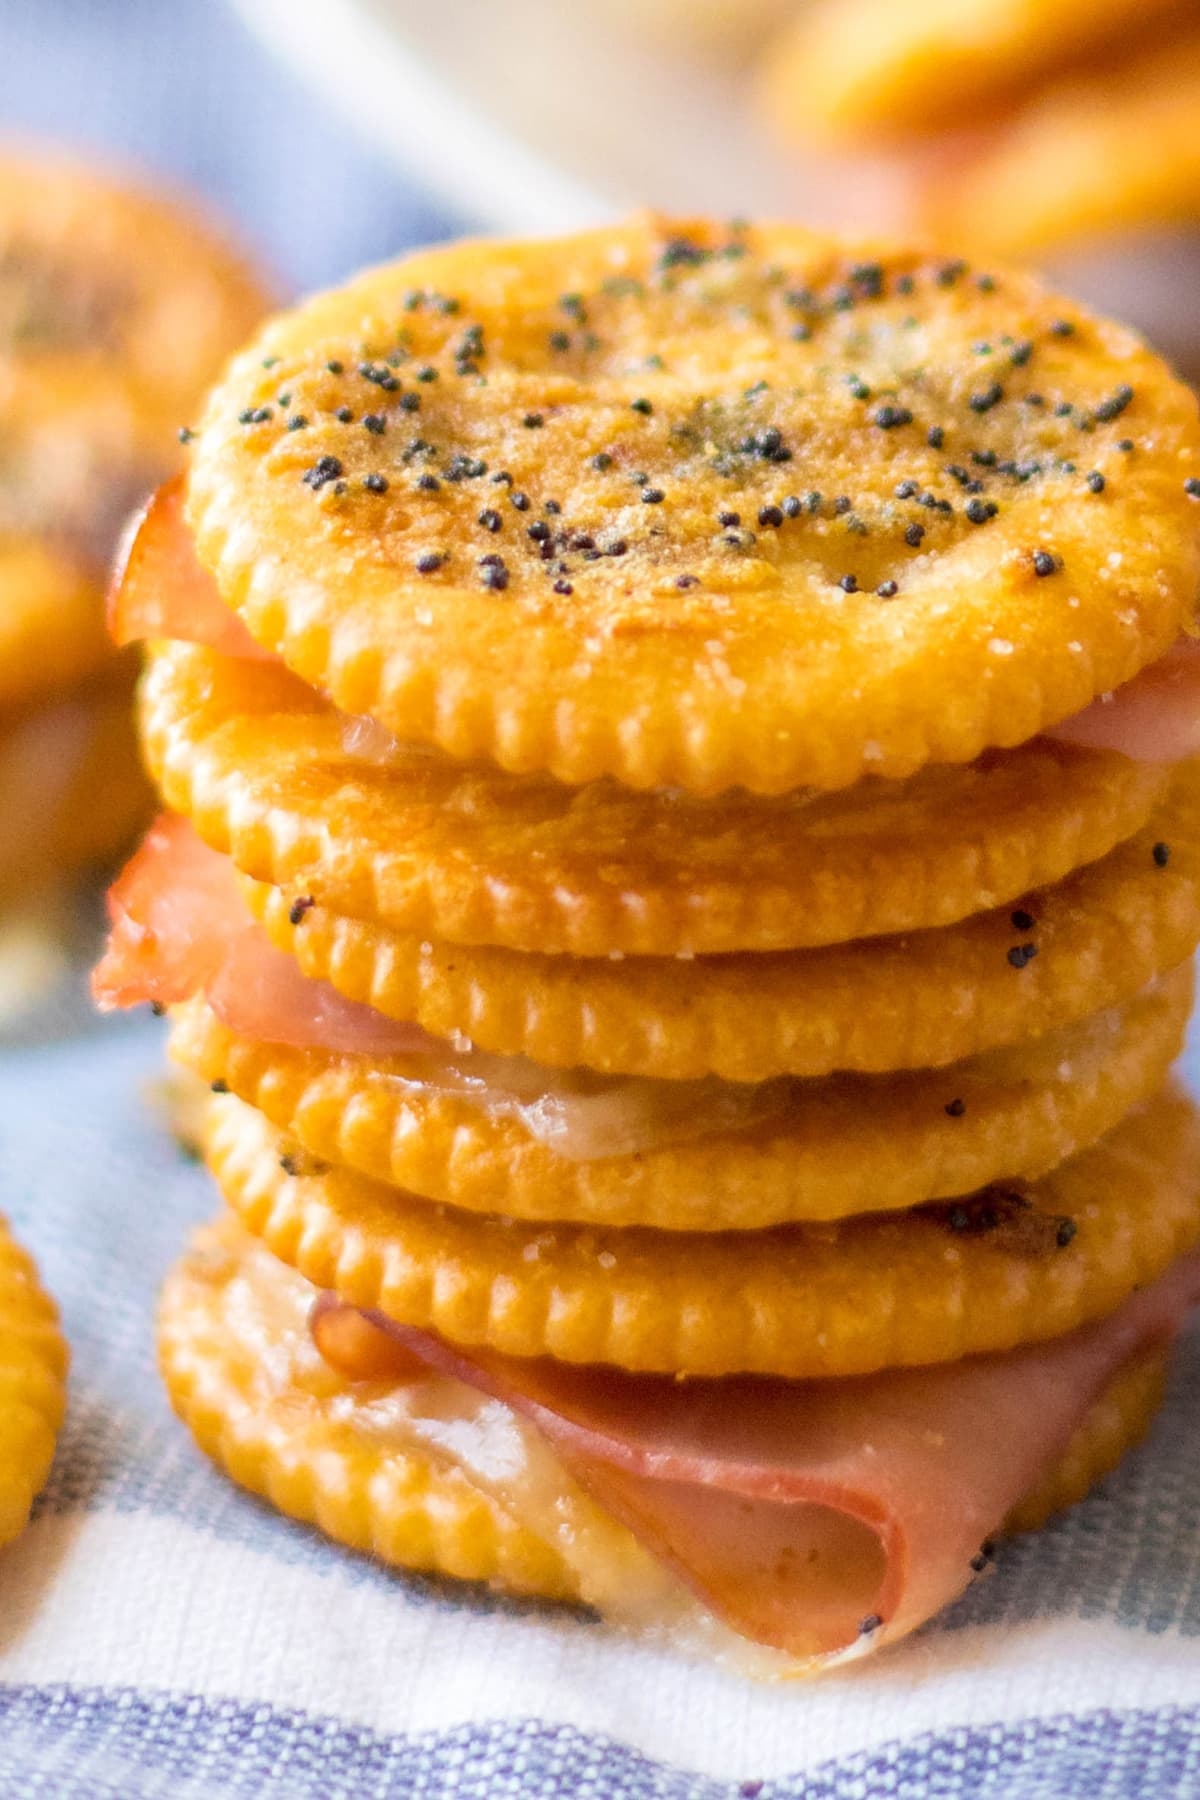 Ritz Cracker Party Sandwiches stacked